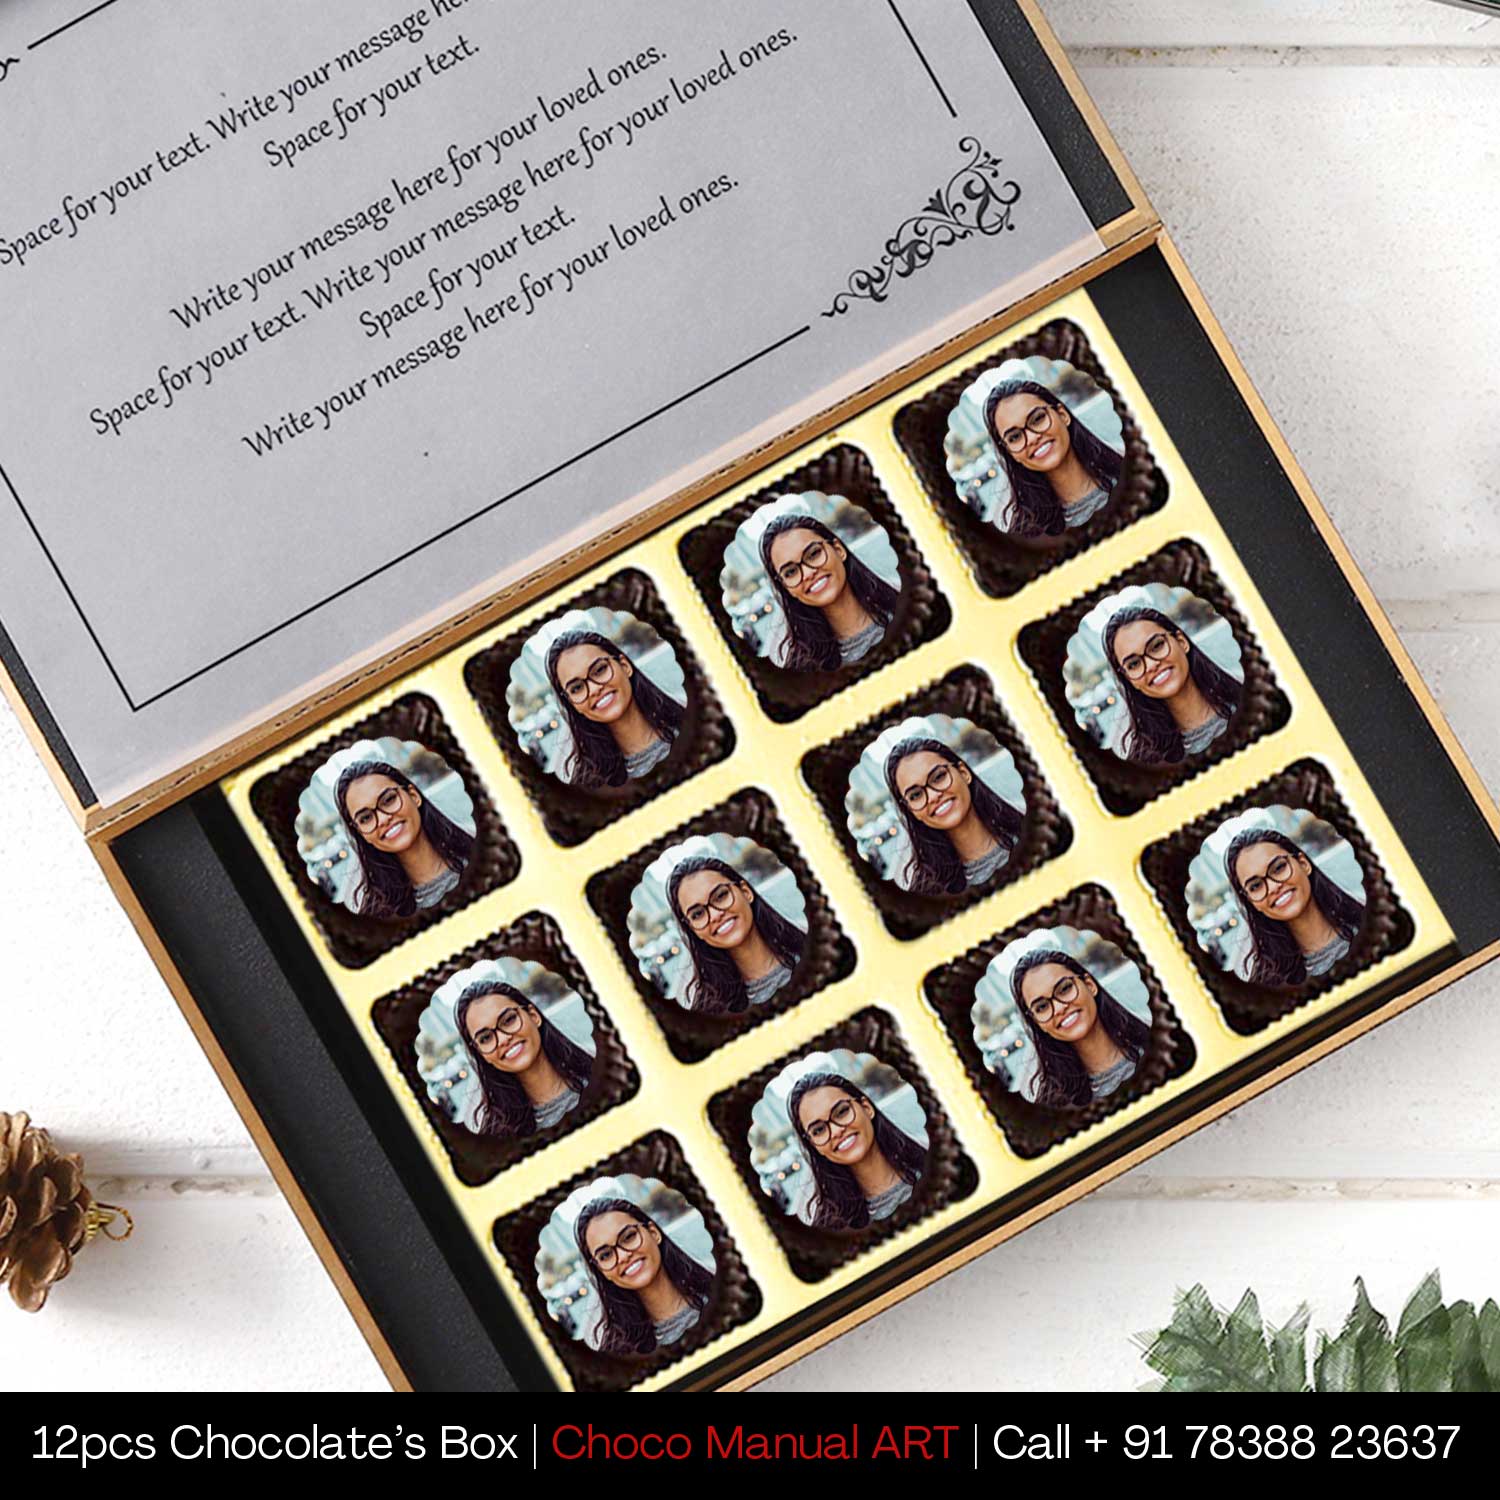 Customized Gift For Personal or Professional Usage